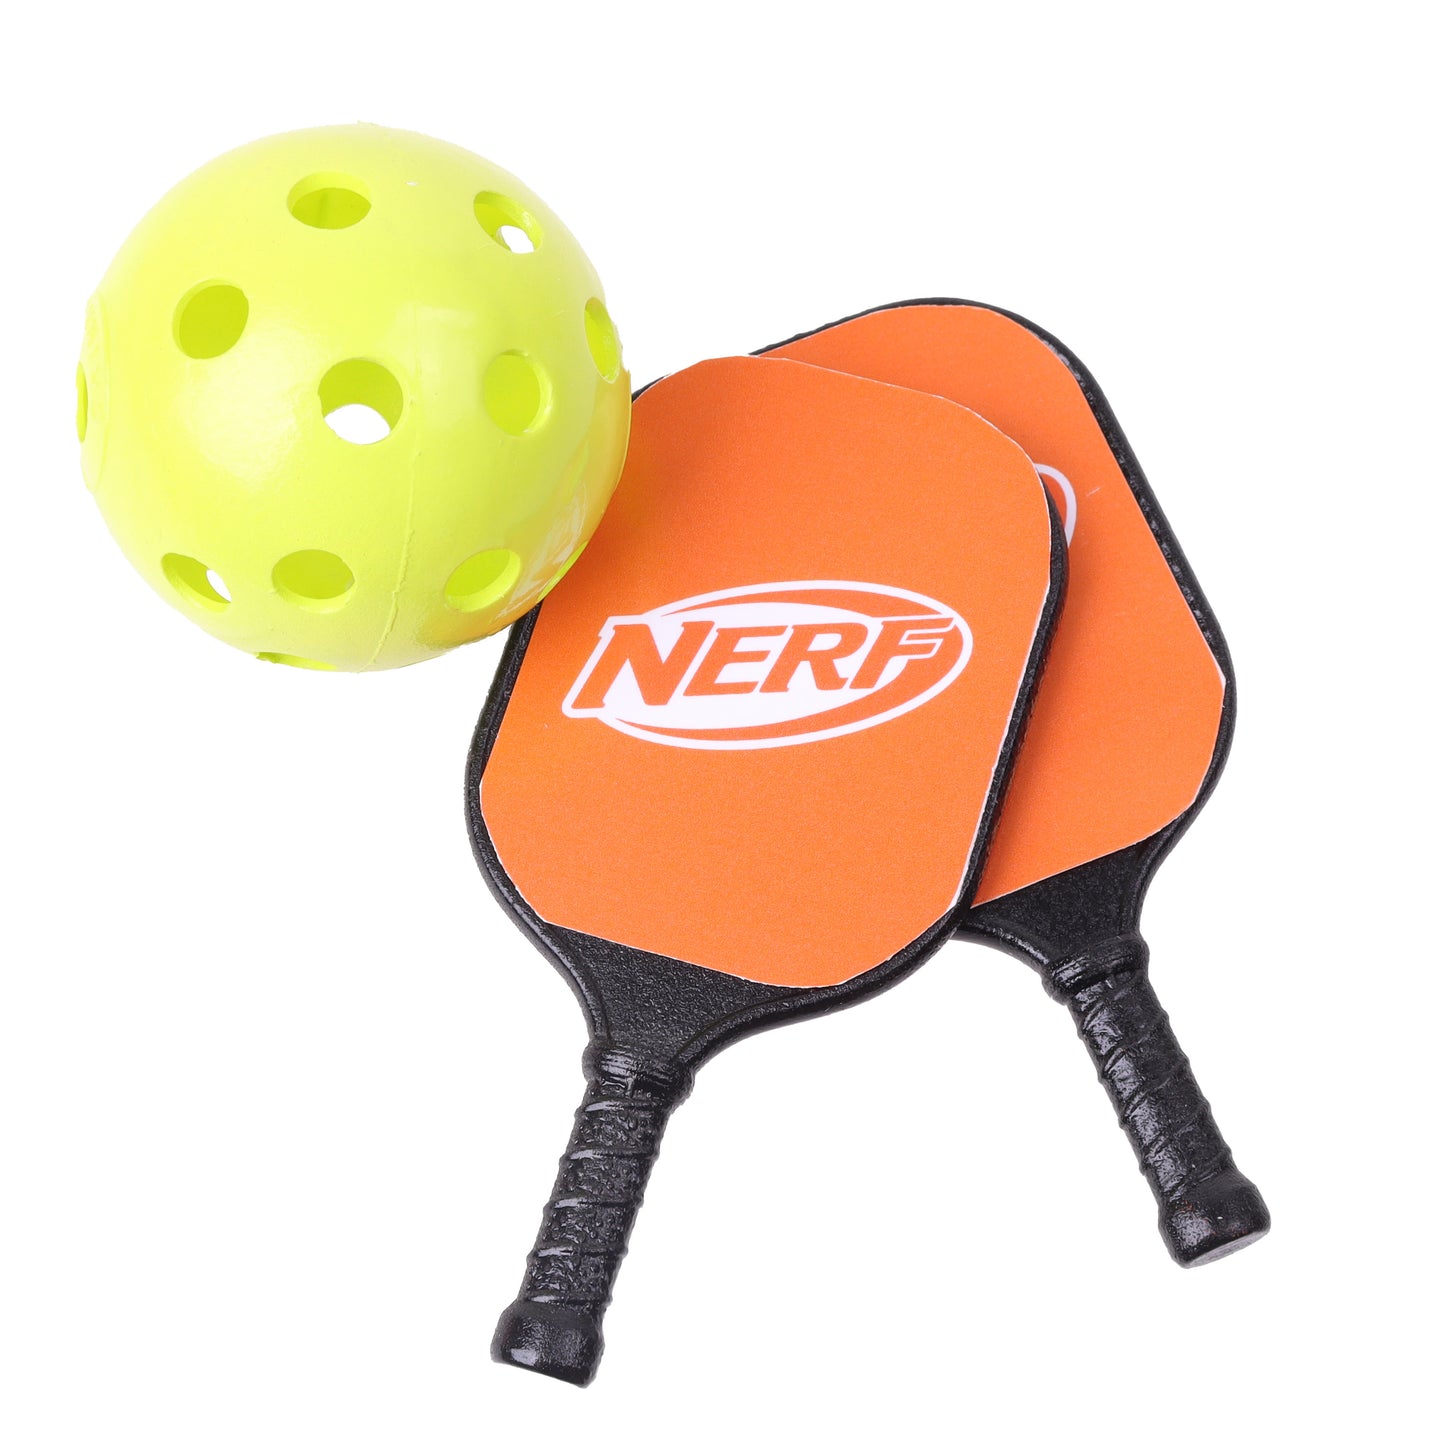 Frankford Nerf Surprise 1oz 4ct